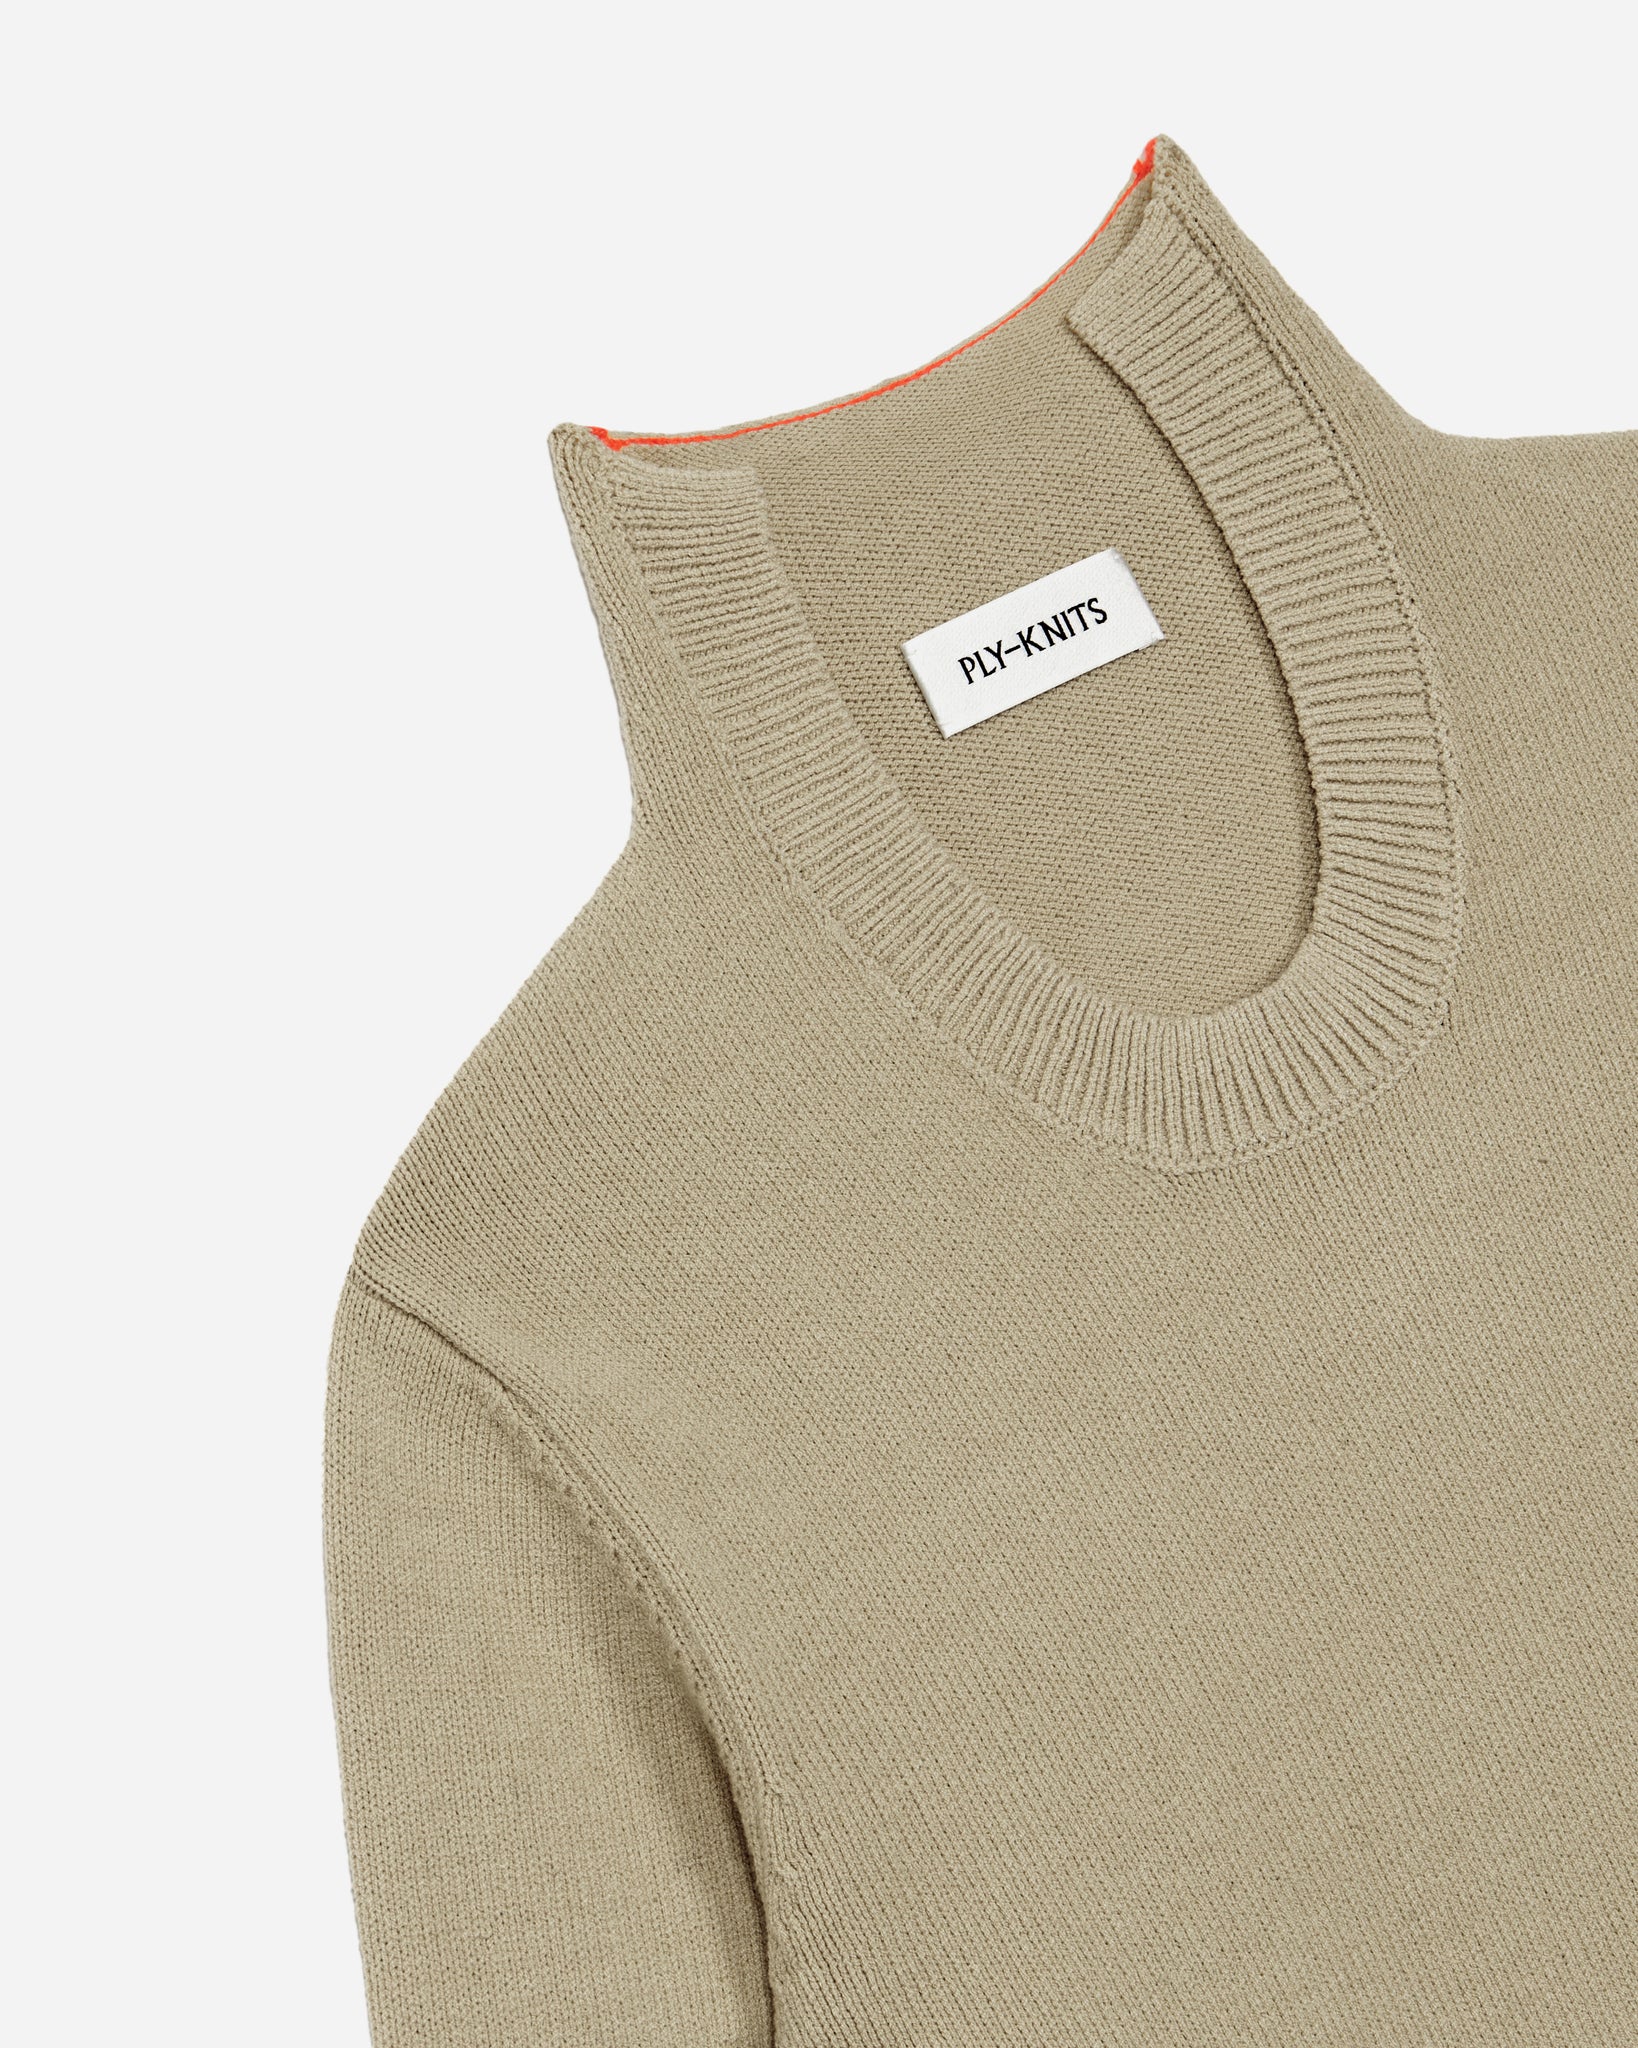 IRENE U-UP COTTON CASHMERE PULLOVER IN PEBBLE